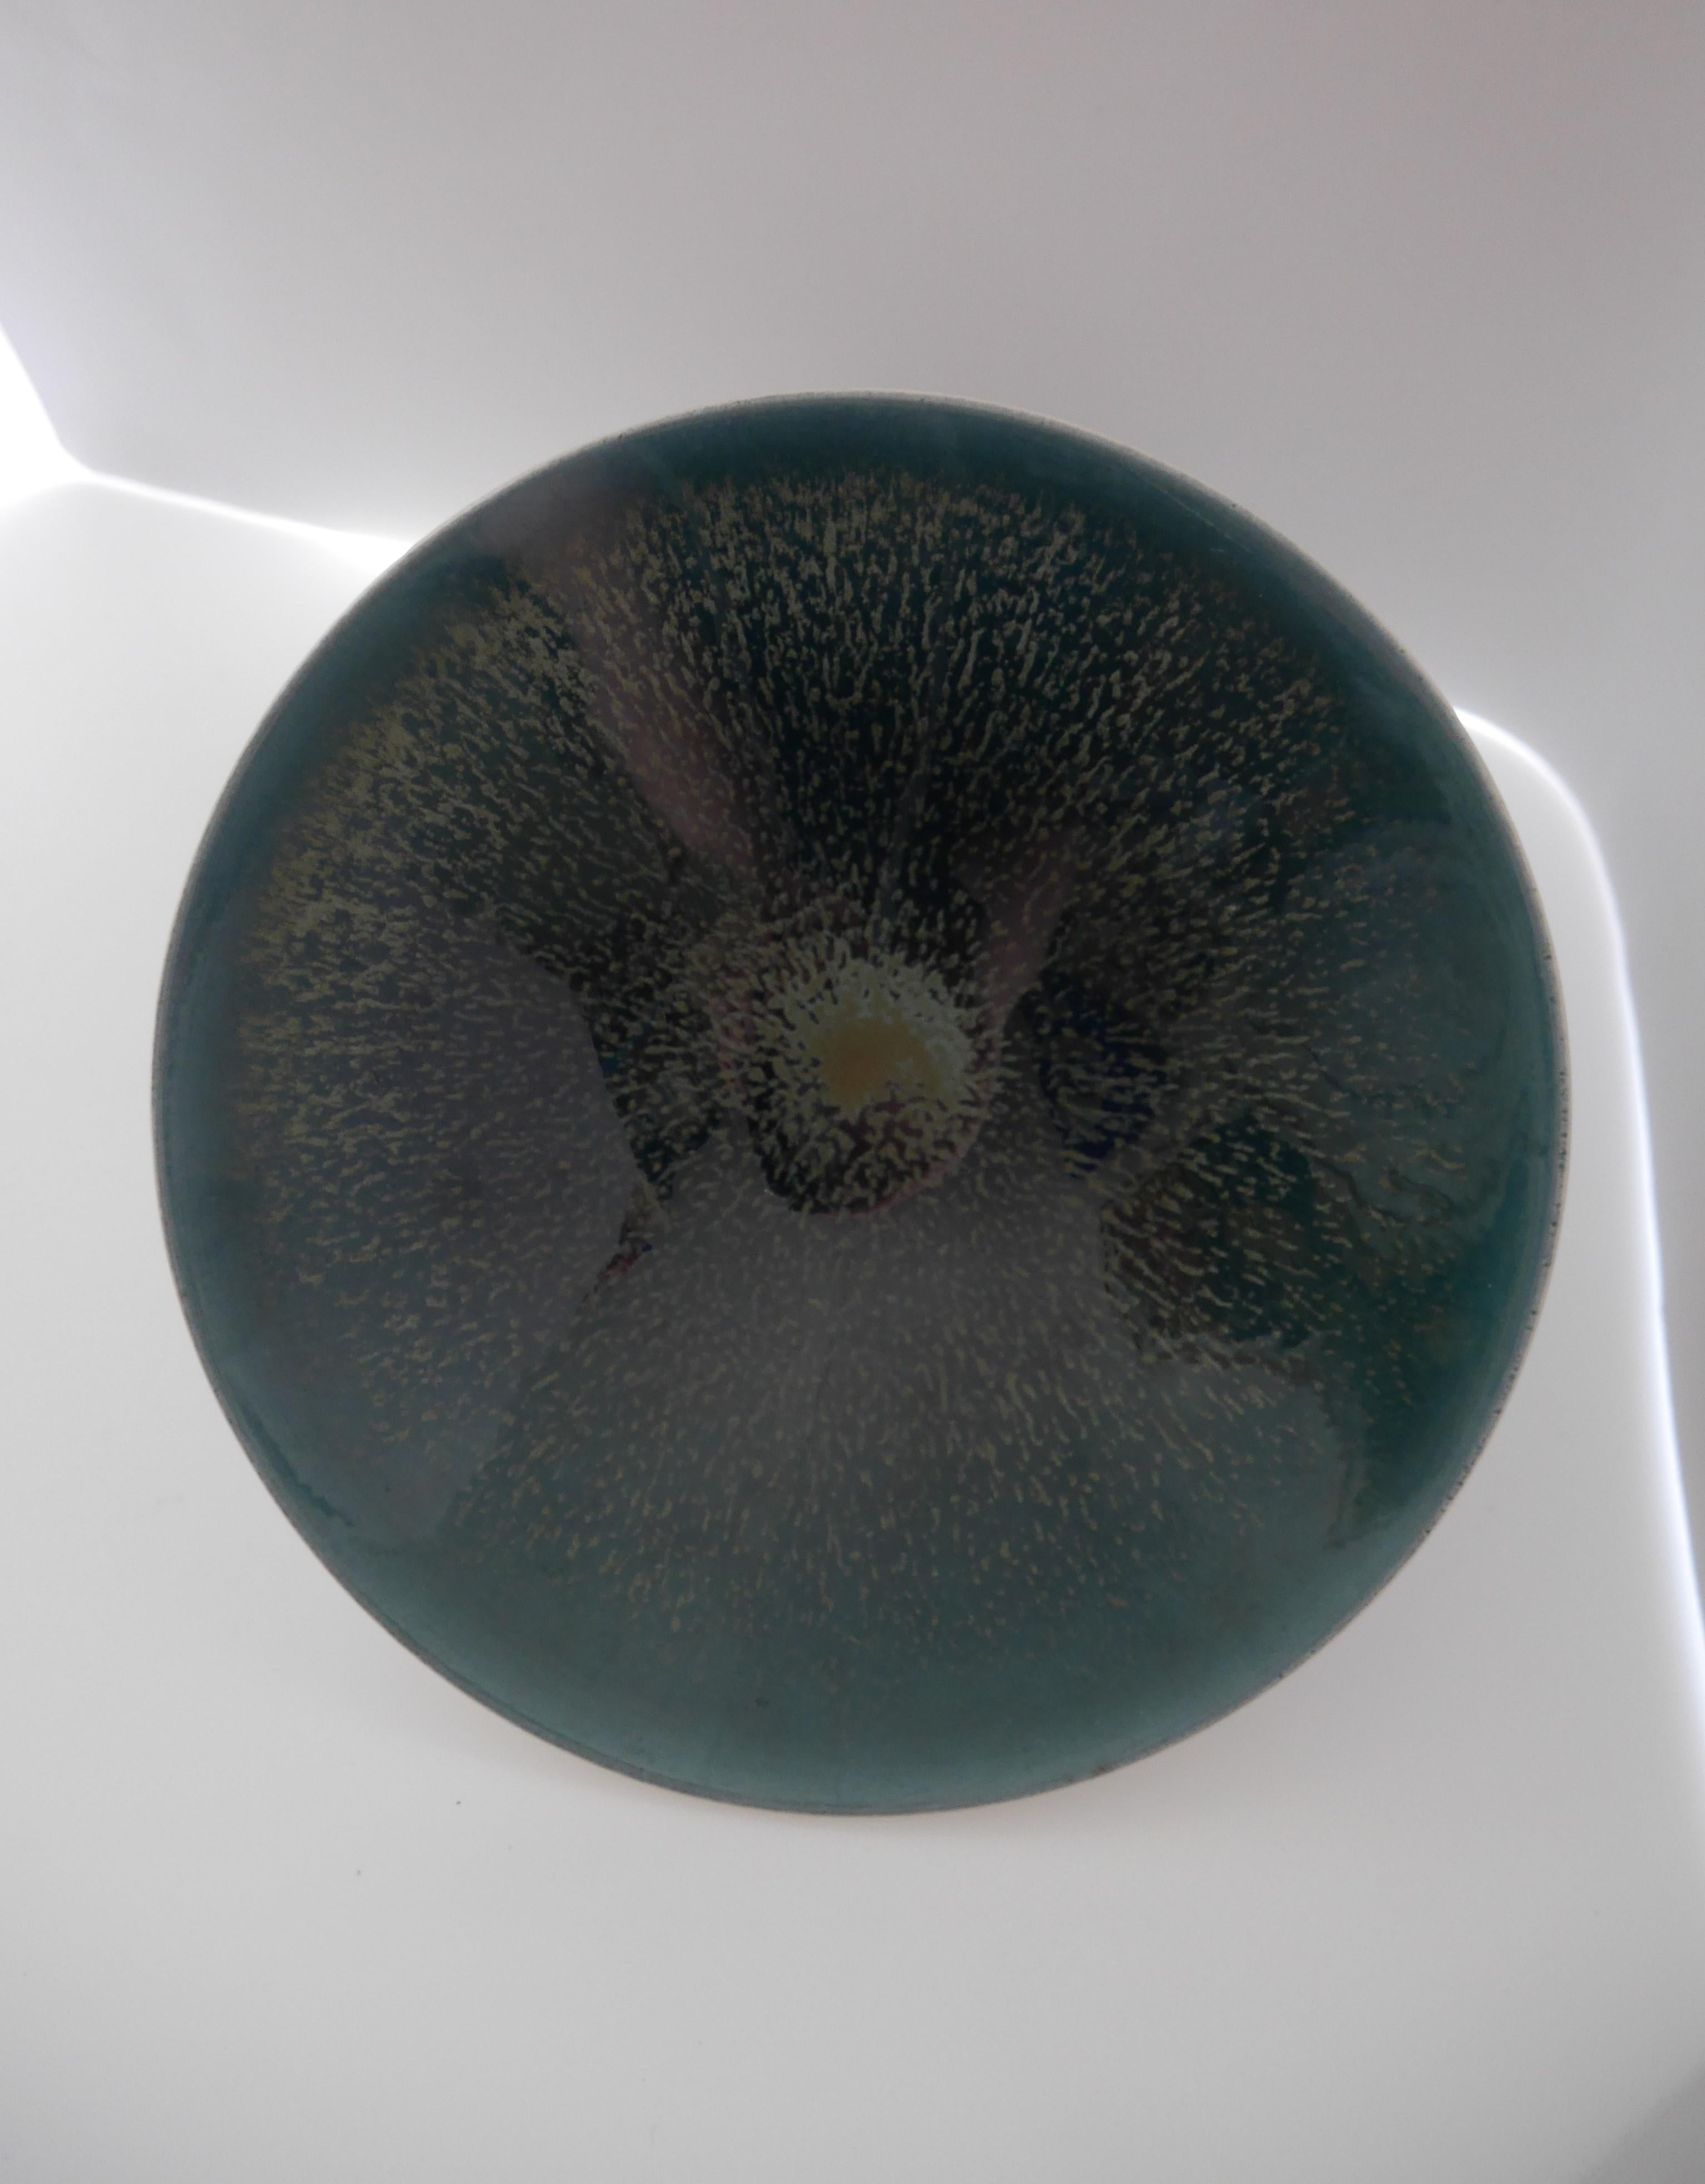 A  fantastic small mid-century modern Poole studio pottery bowl, England. This is a rare item for the company due to the special color and glazing. This ceramic bowl has a fantastic glazing in some fantastic colors ranging from green to blue to